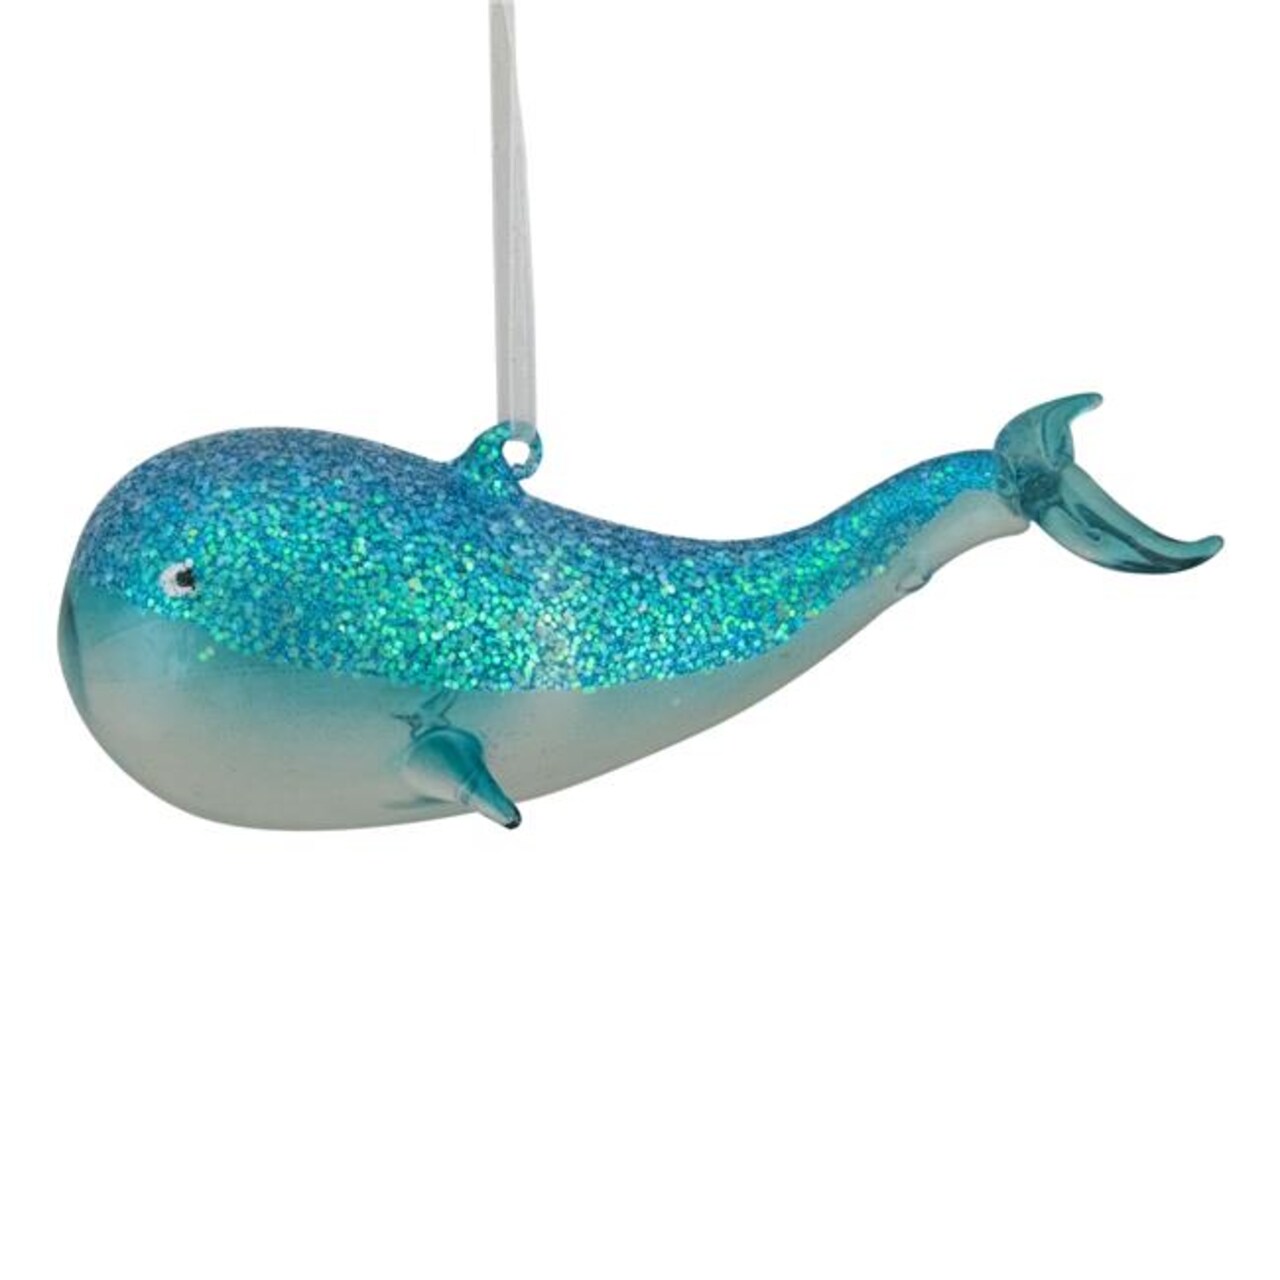 NorthLight 34294751 6 in. Glass Glittered Whale Christmas Ornament, Blue